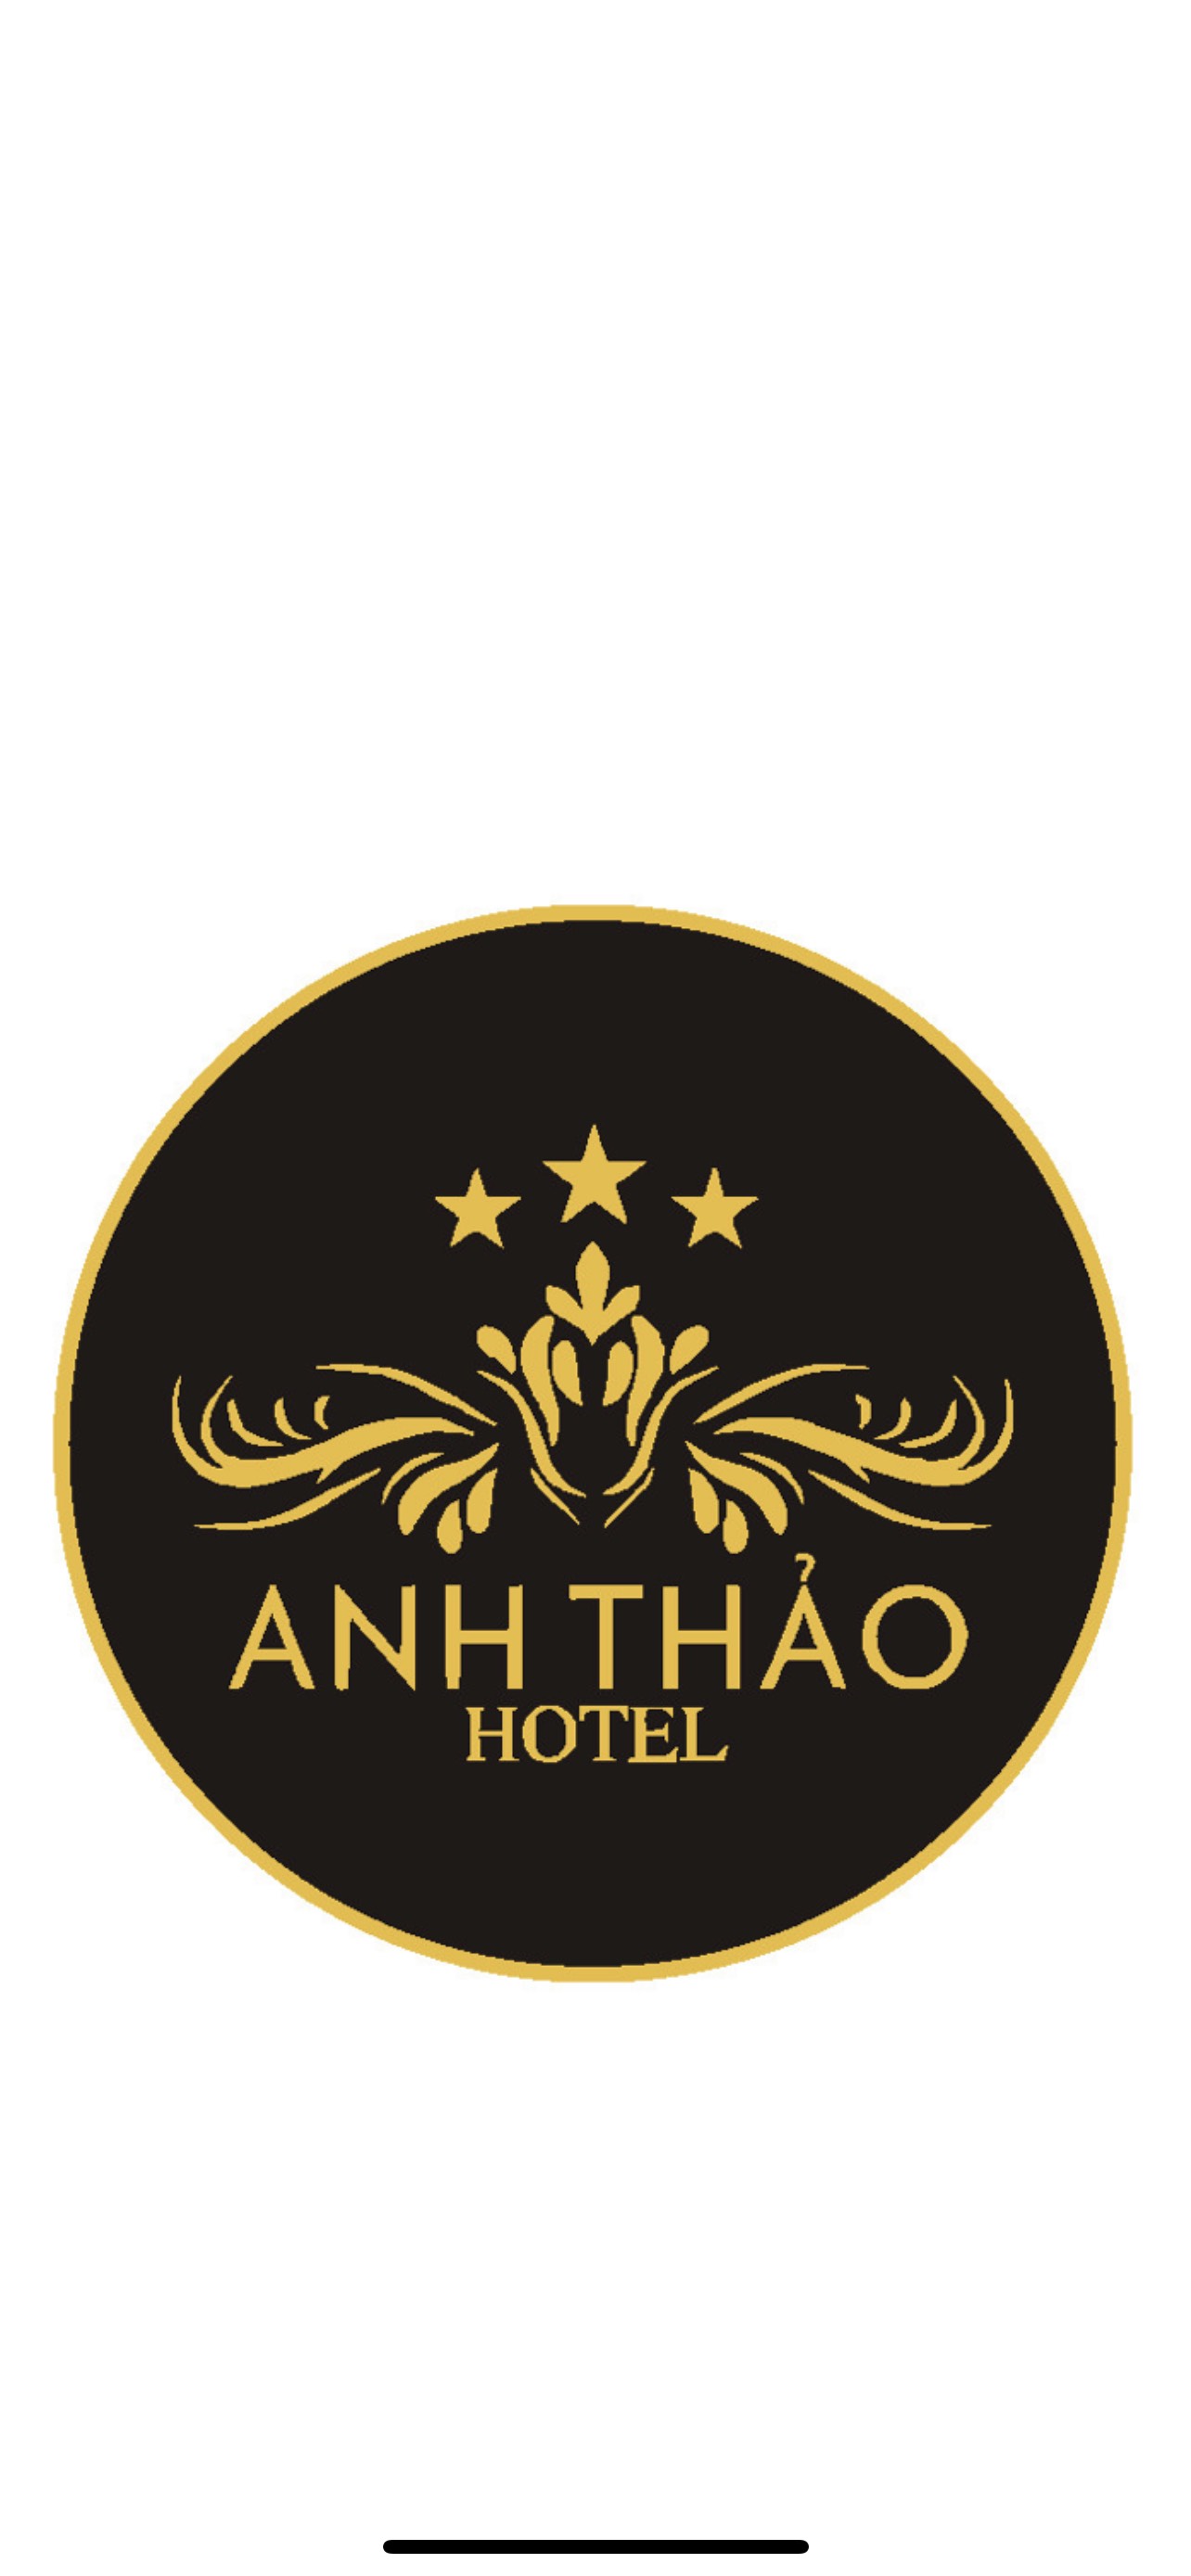 Anh Thao Hotel